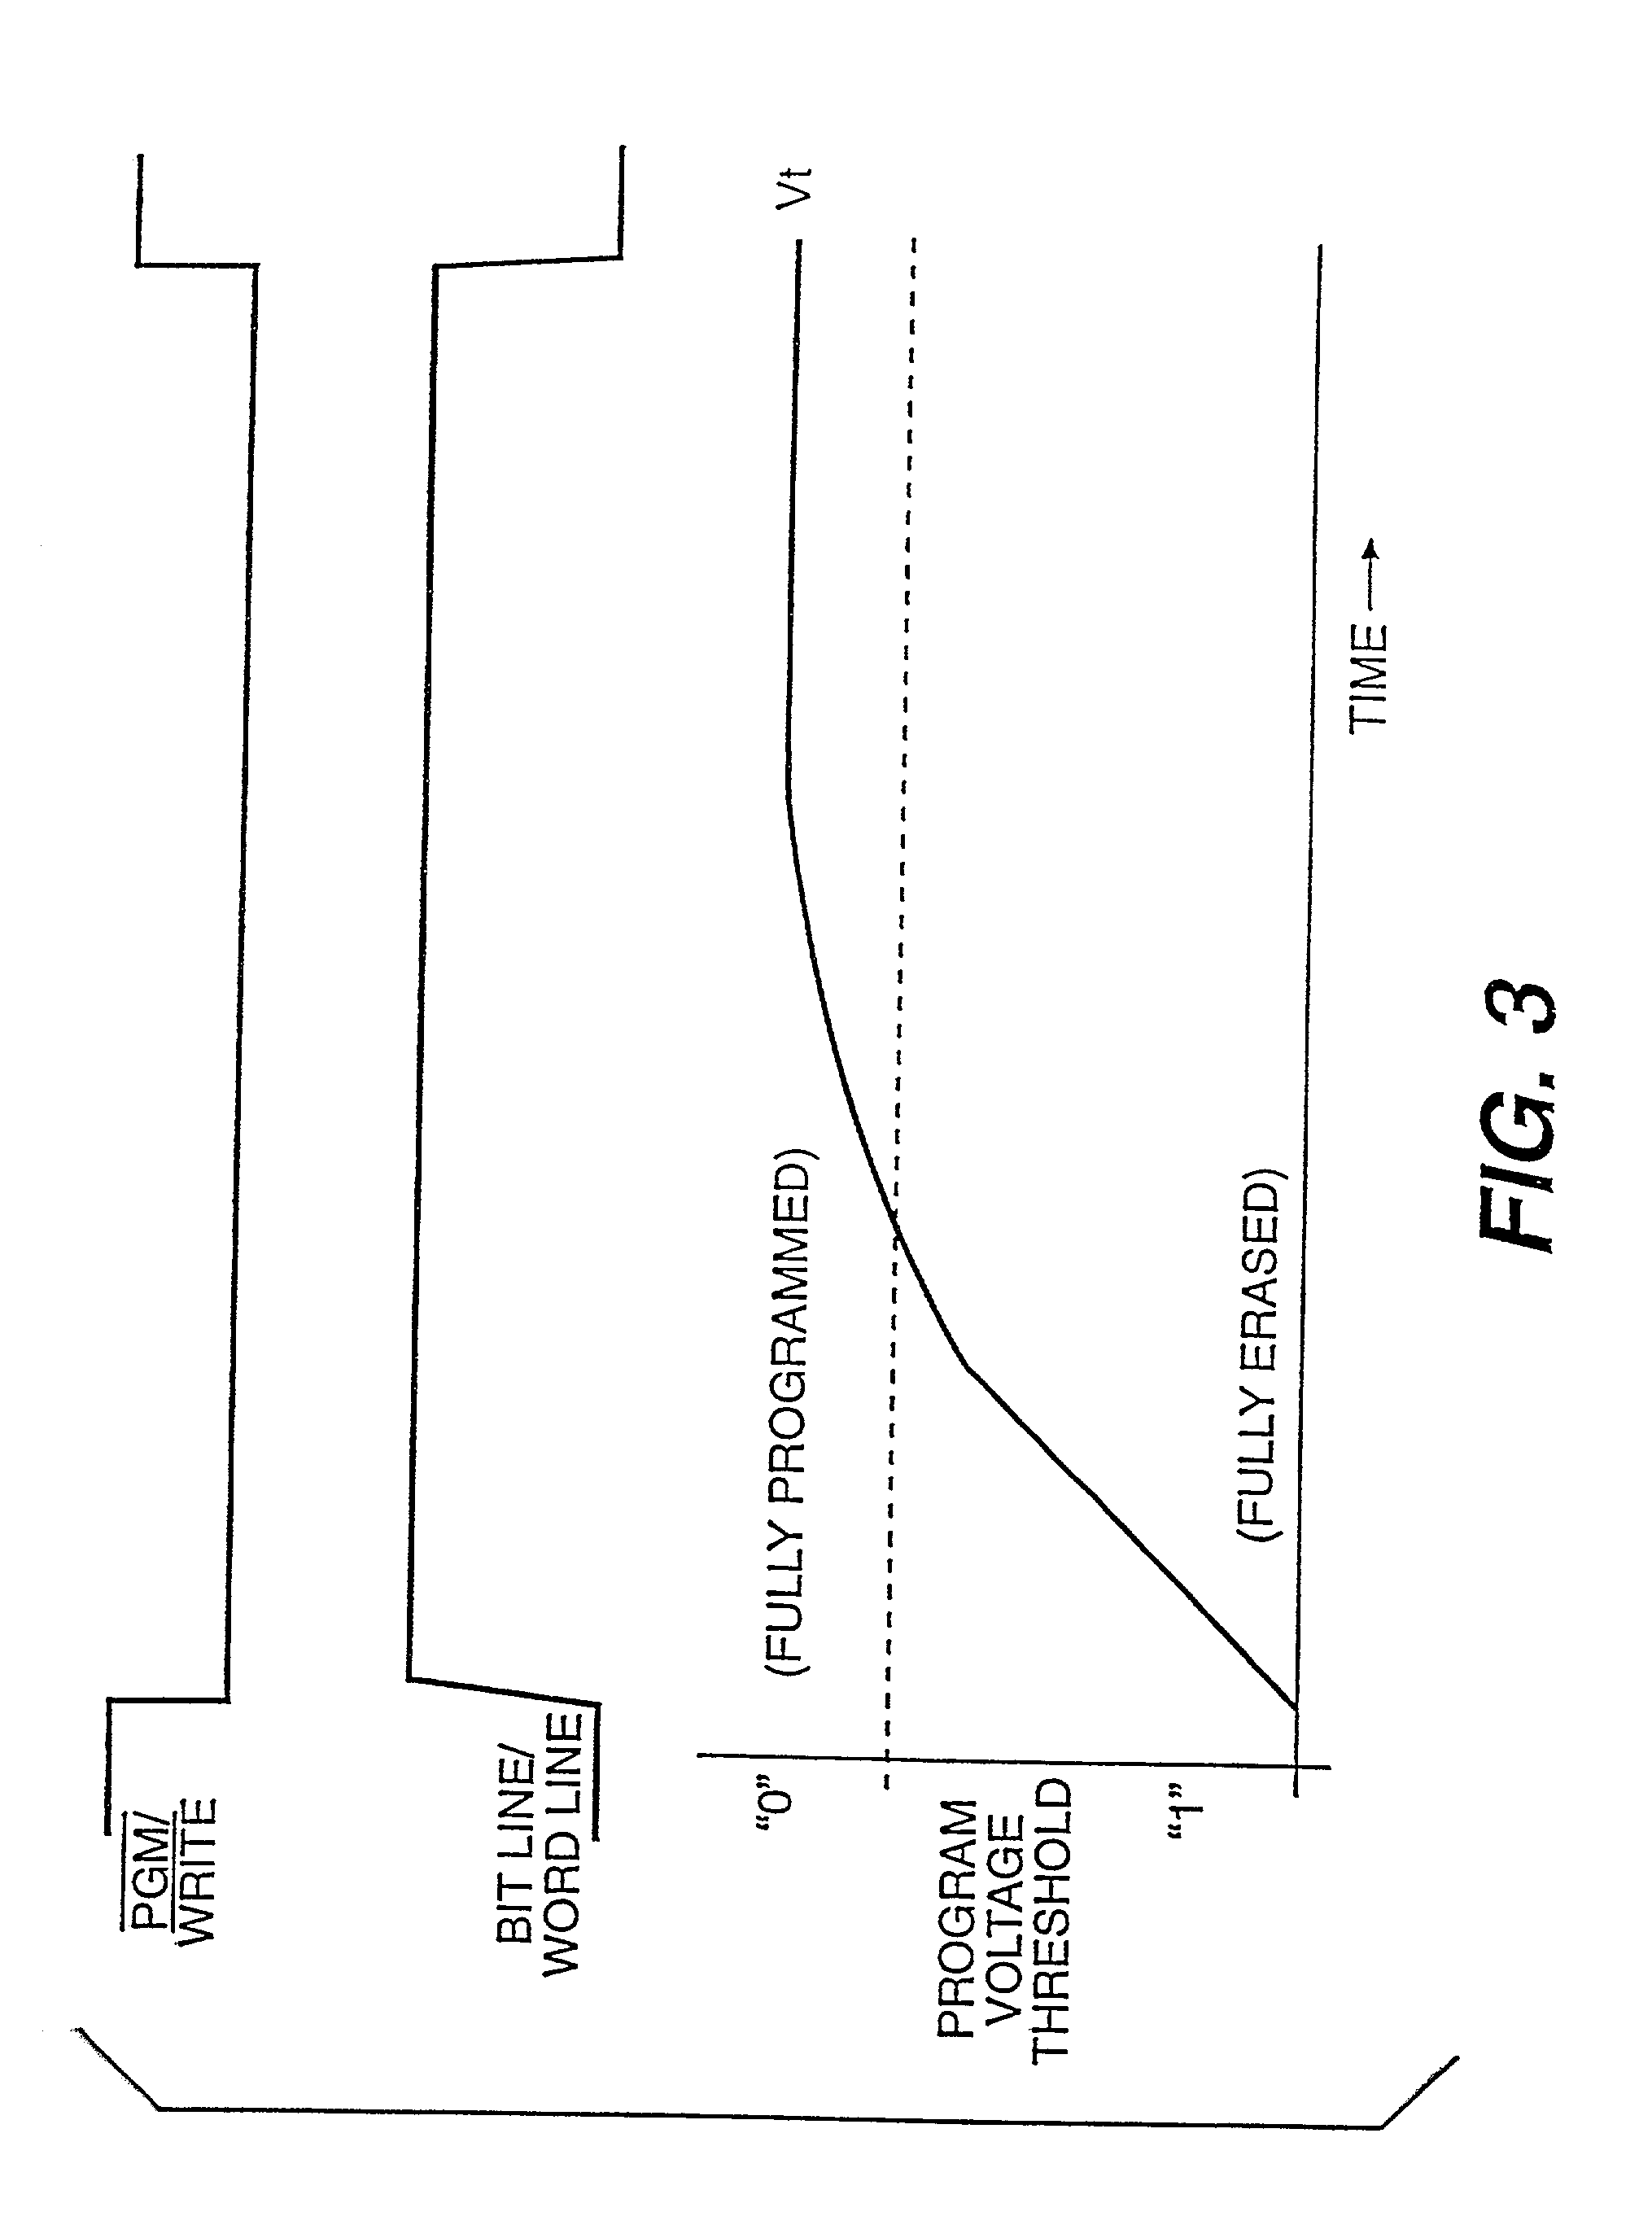 Electrically alterable non-volatile memory with n-bits per cell